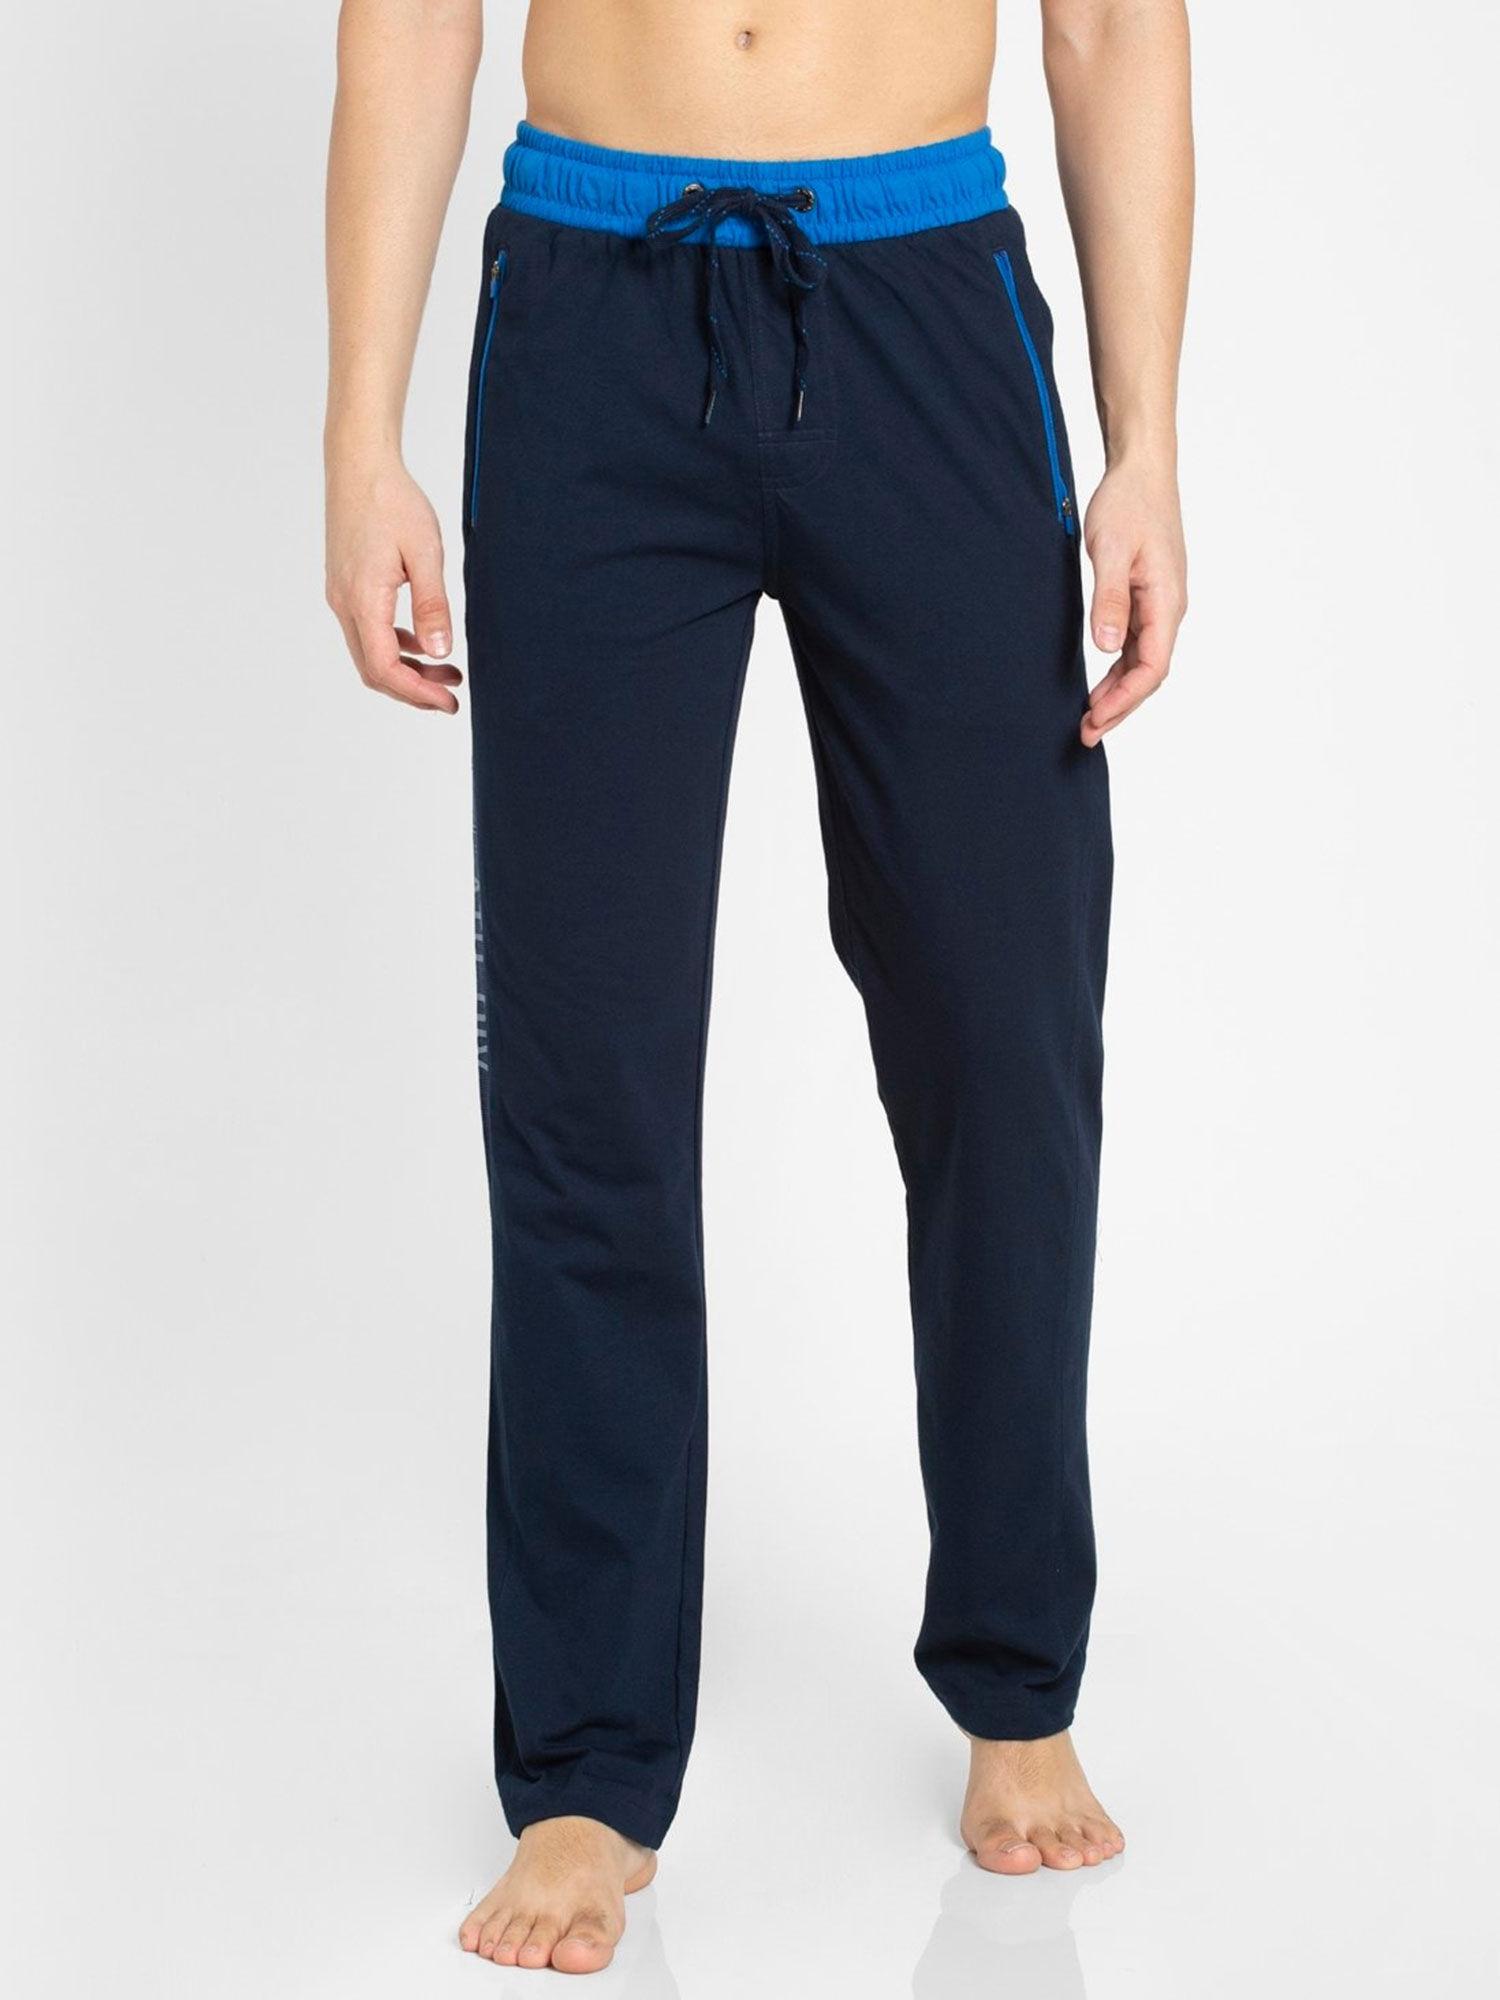 Navy & Neon Blue Sports Track Pant